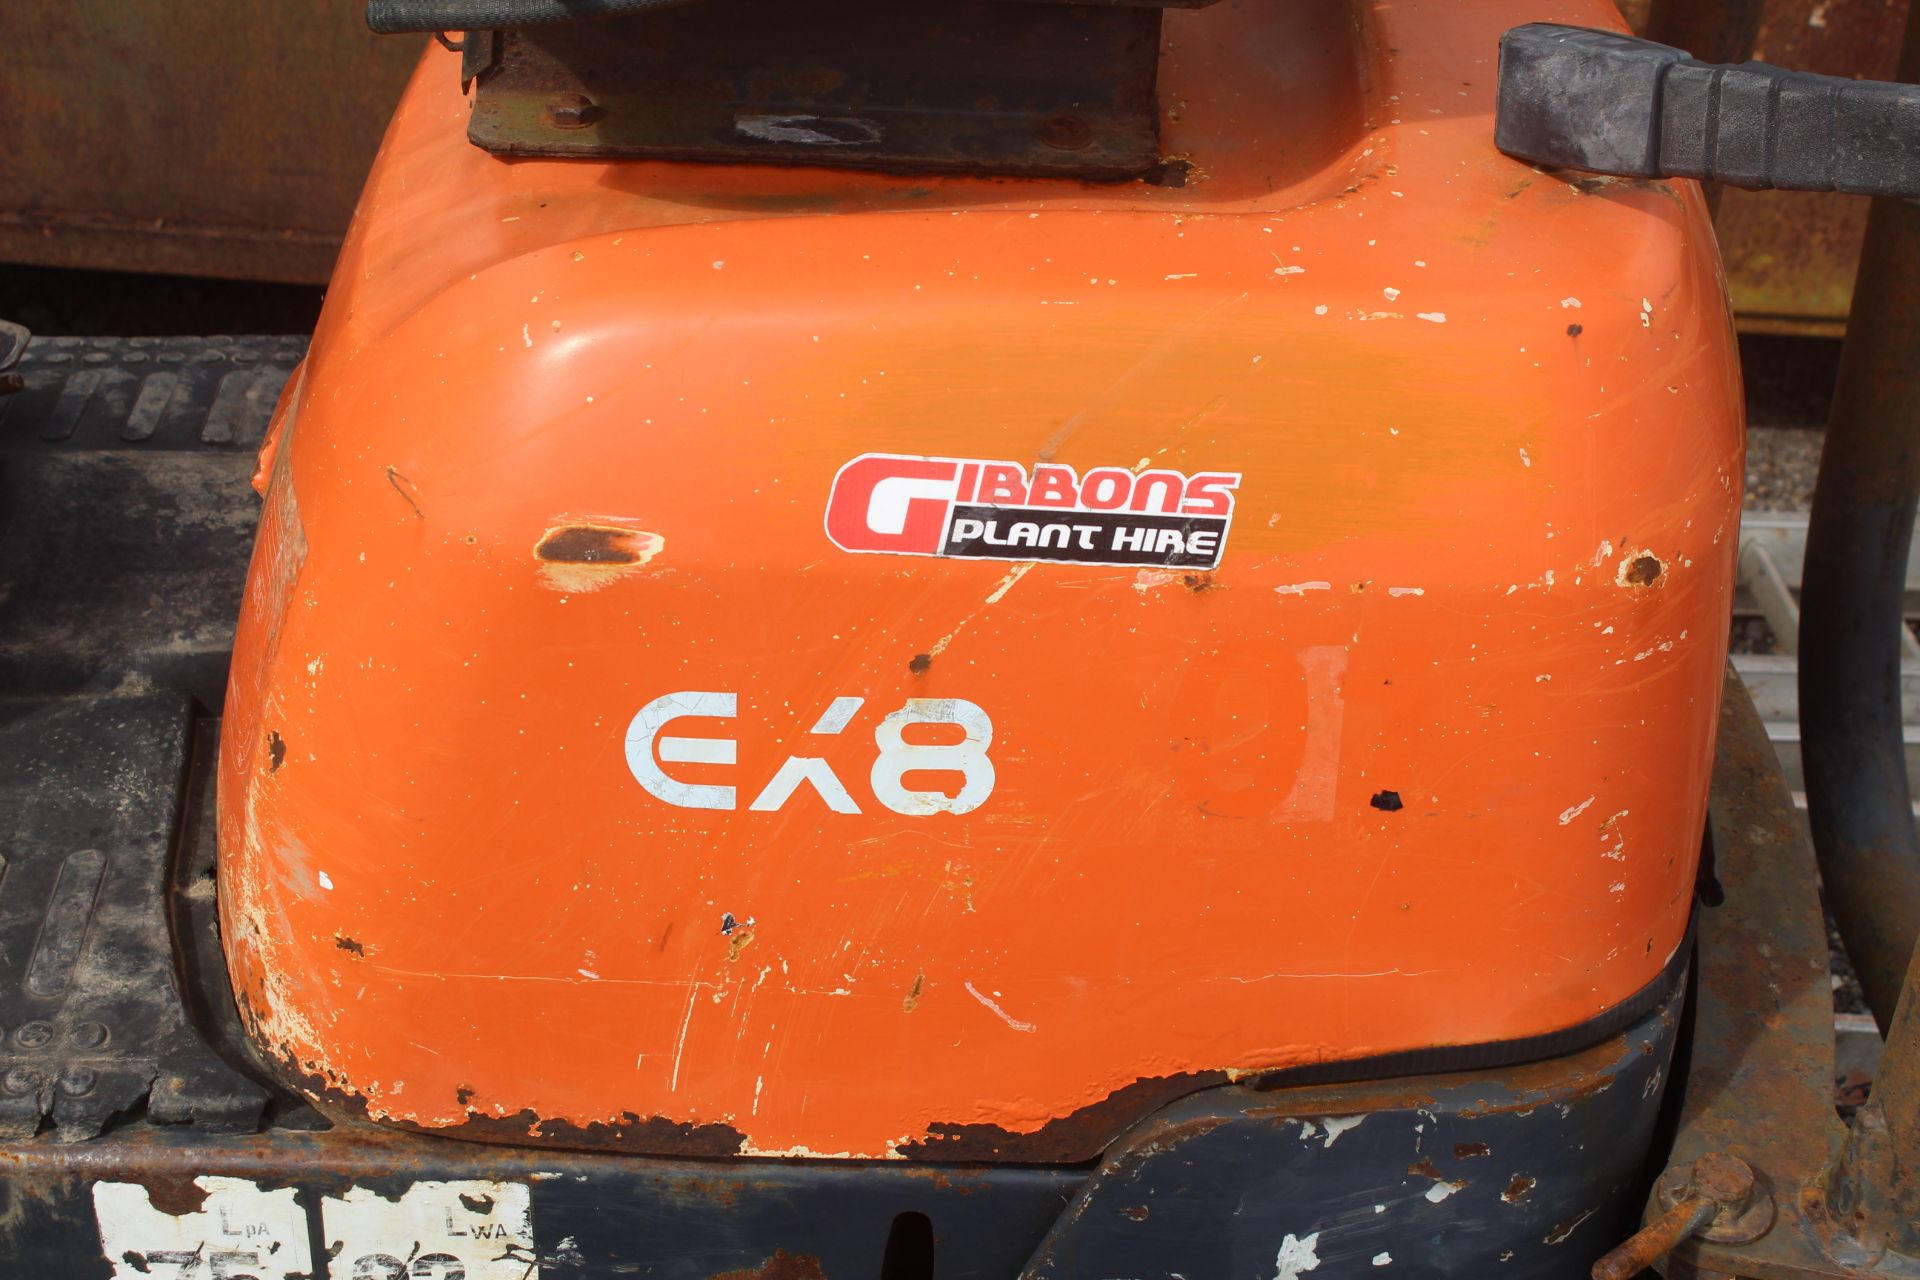 Hitachi EX8-2B 0.8T rubber track micro excavator. 2003. 2,209 hours. Serial number 1AGP004974. - Image 20 of 41